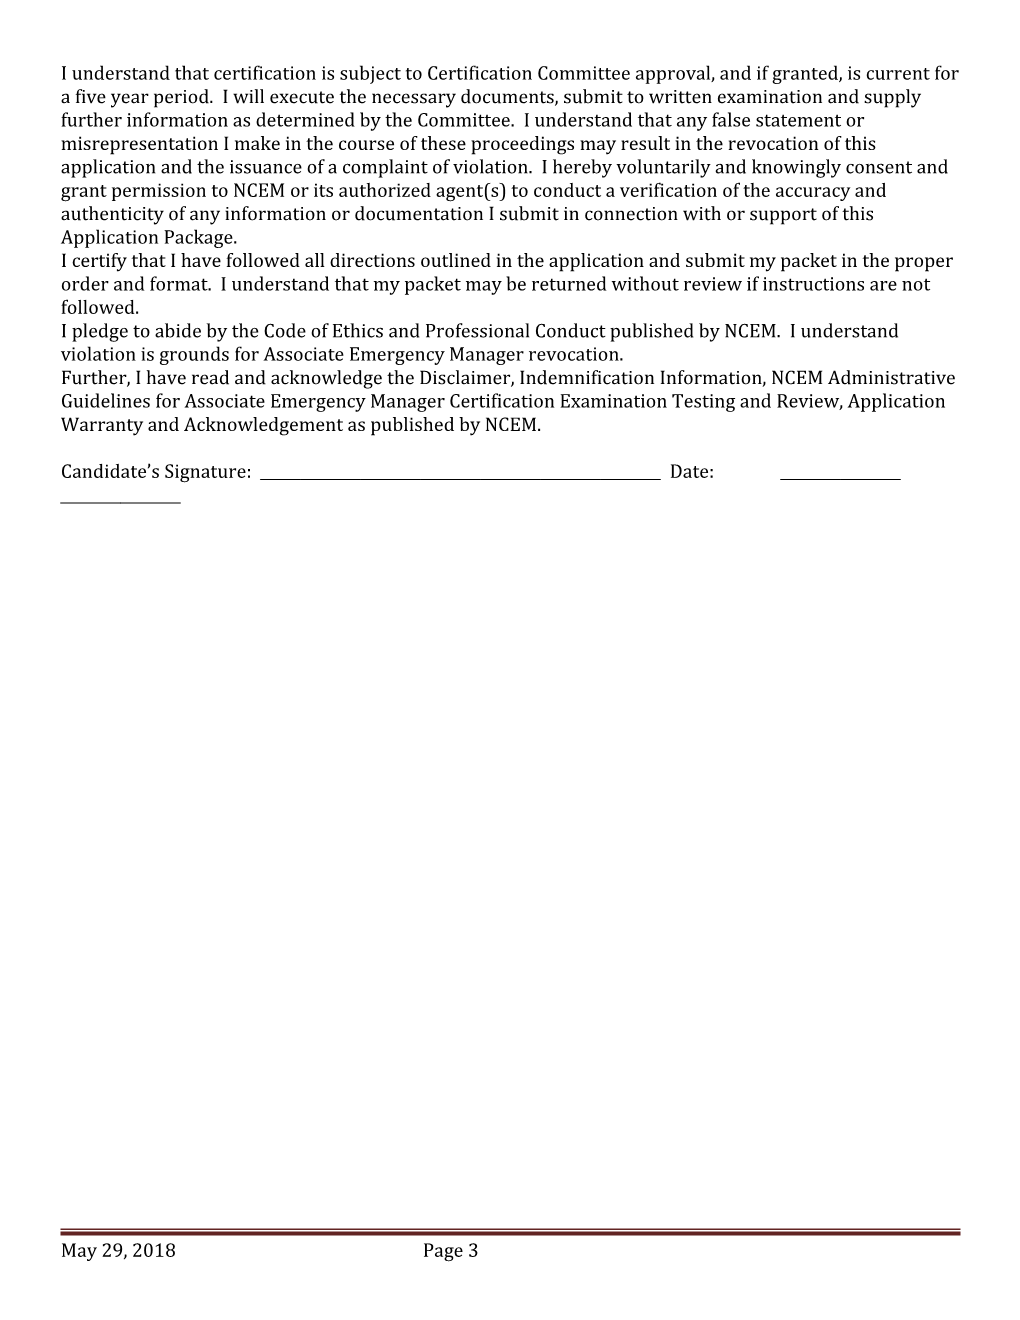 Associate Emergency Manager Application Cover Sheet